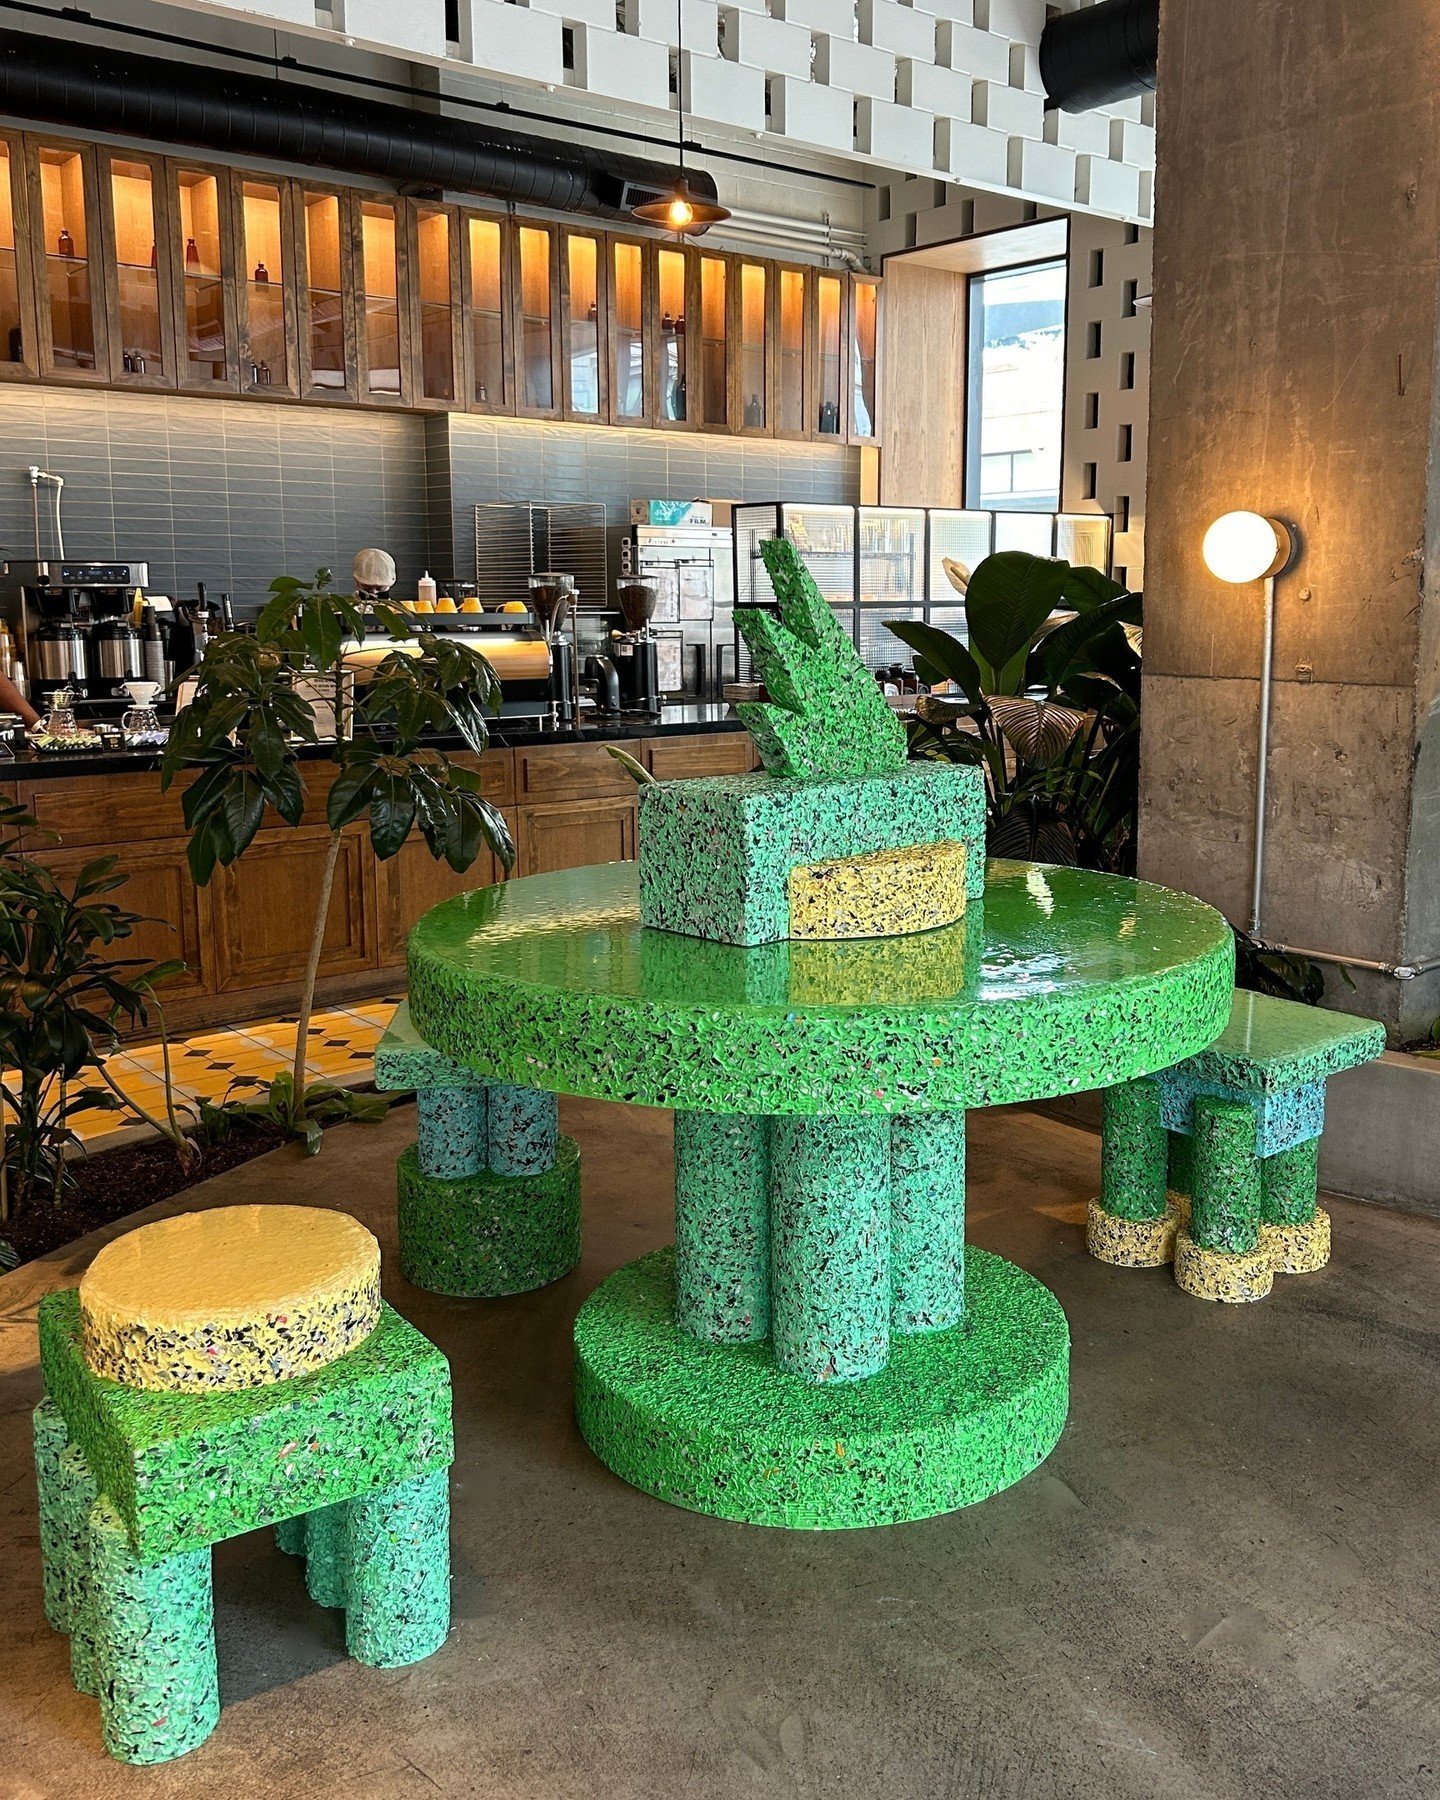 We love helping brands implement sustainable initiatives using recyclable materials 📱🌎

IDEKO worked with @casetify to fabricate the #ReCASETiFY Rest Stop, a functional seating area comprised of ground pellets from 13,000 recycled phone cases desig